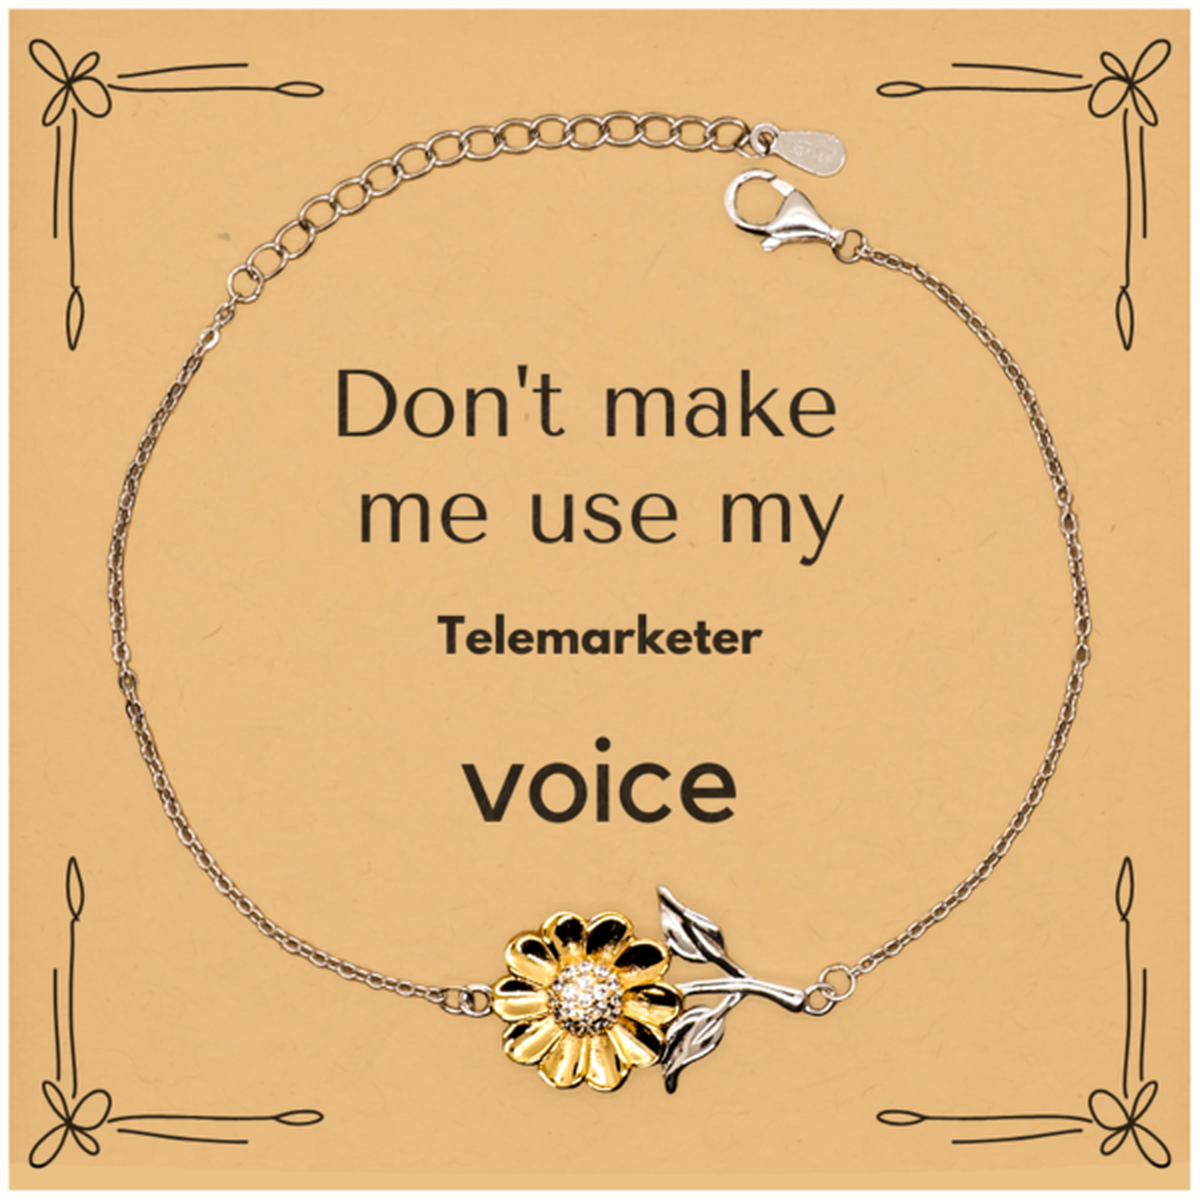 Don't make me use my Telemarketer voice, Sarcasm Telemarketer Card Gifts, Christmas Telemarketer Sunflower Bracelet Birthday Unique Gifts For Telemarketer Coworkers, Men, Women, Colleague, Friends